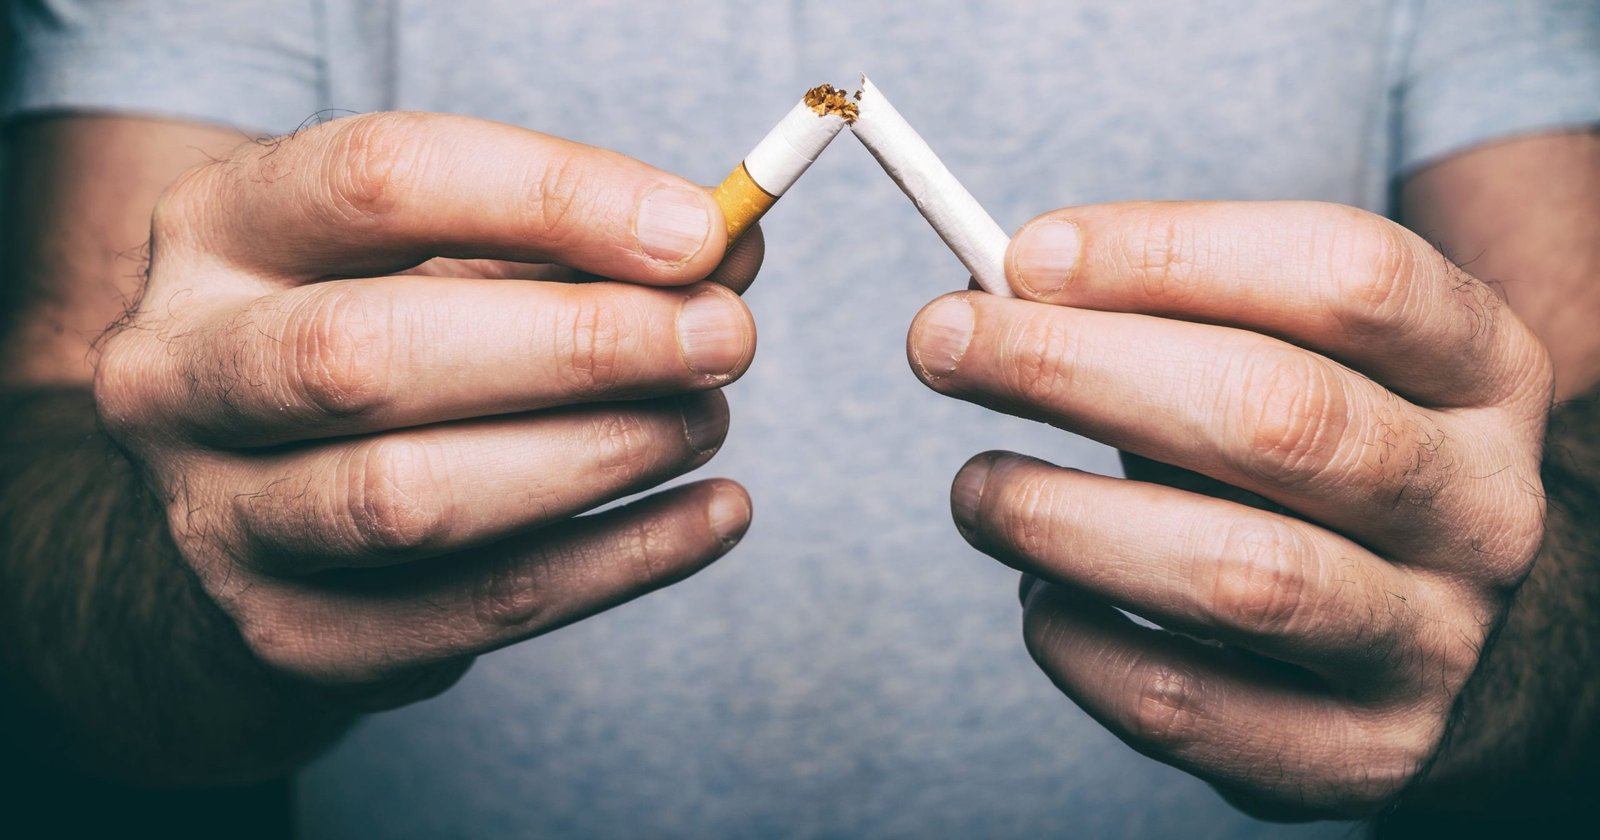 How can I Quit Smoking?